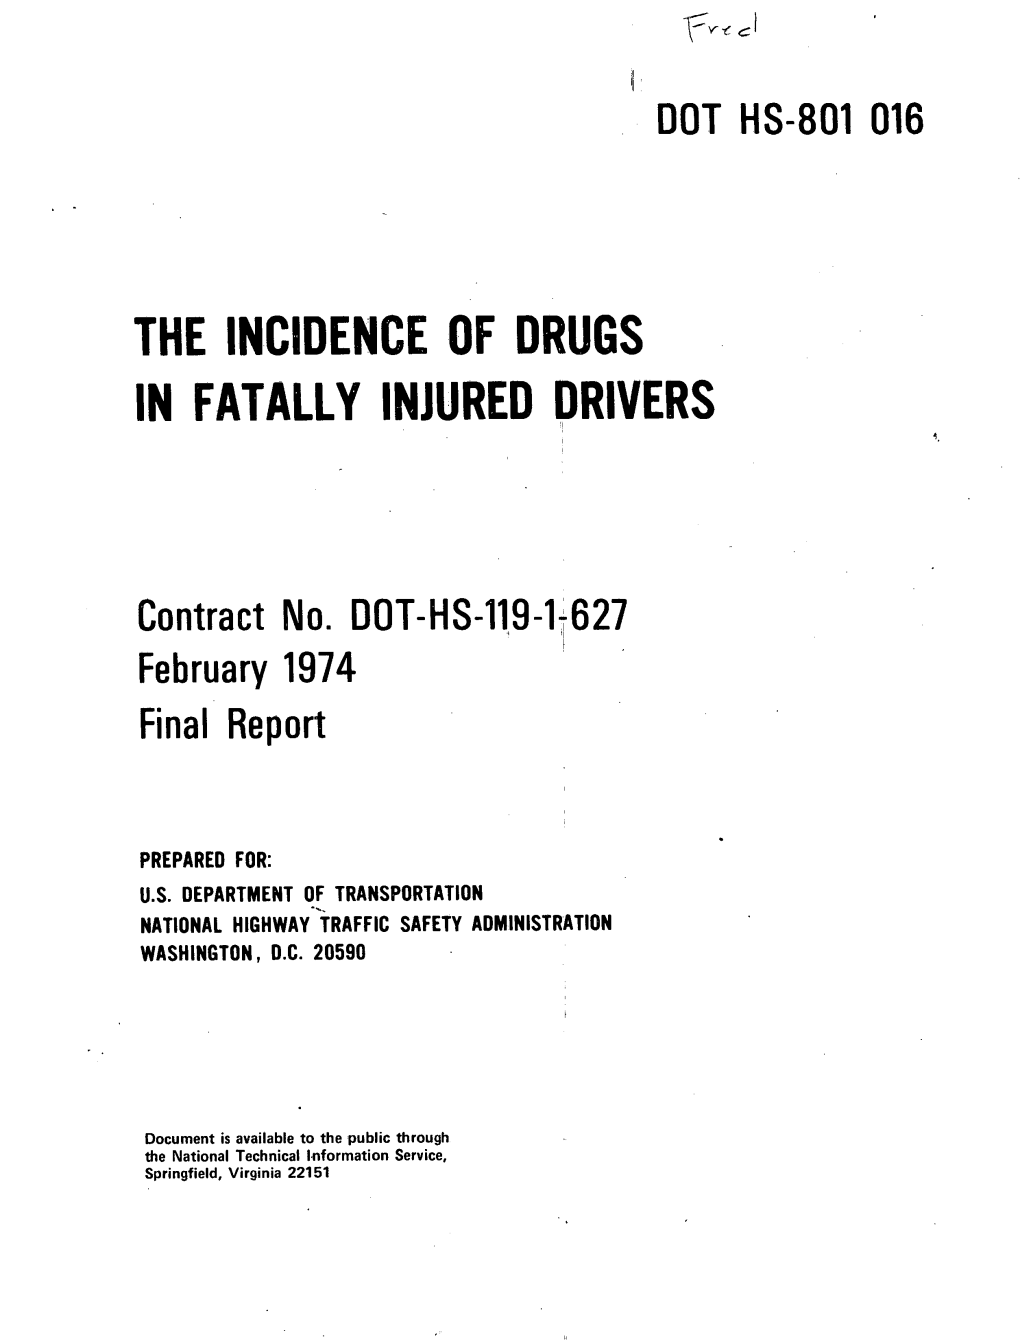 The Incidence of Drugs in Fatally Injured Drivers